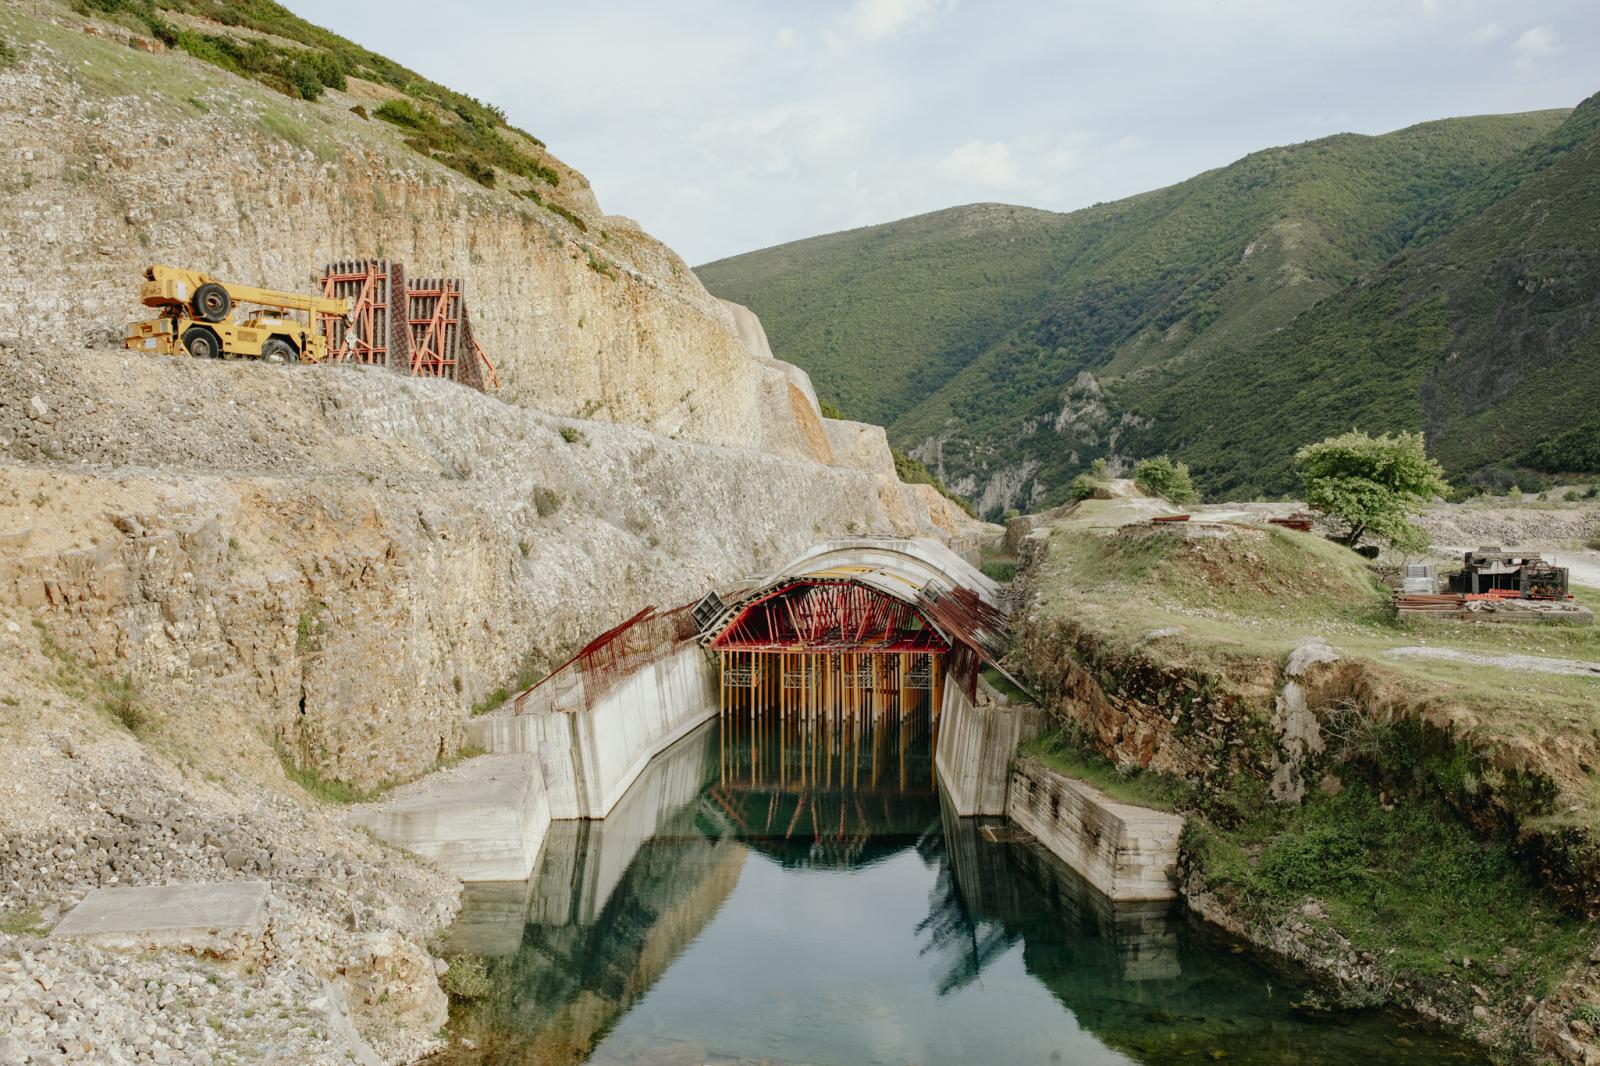 Stopped dam project in Kalivac. 